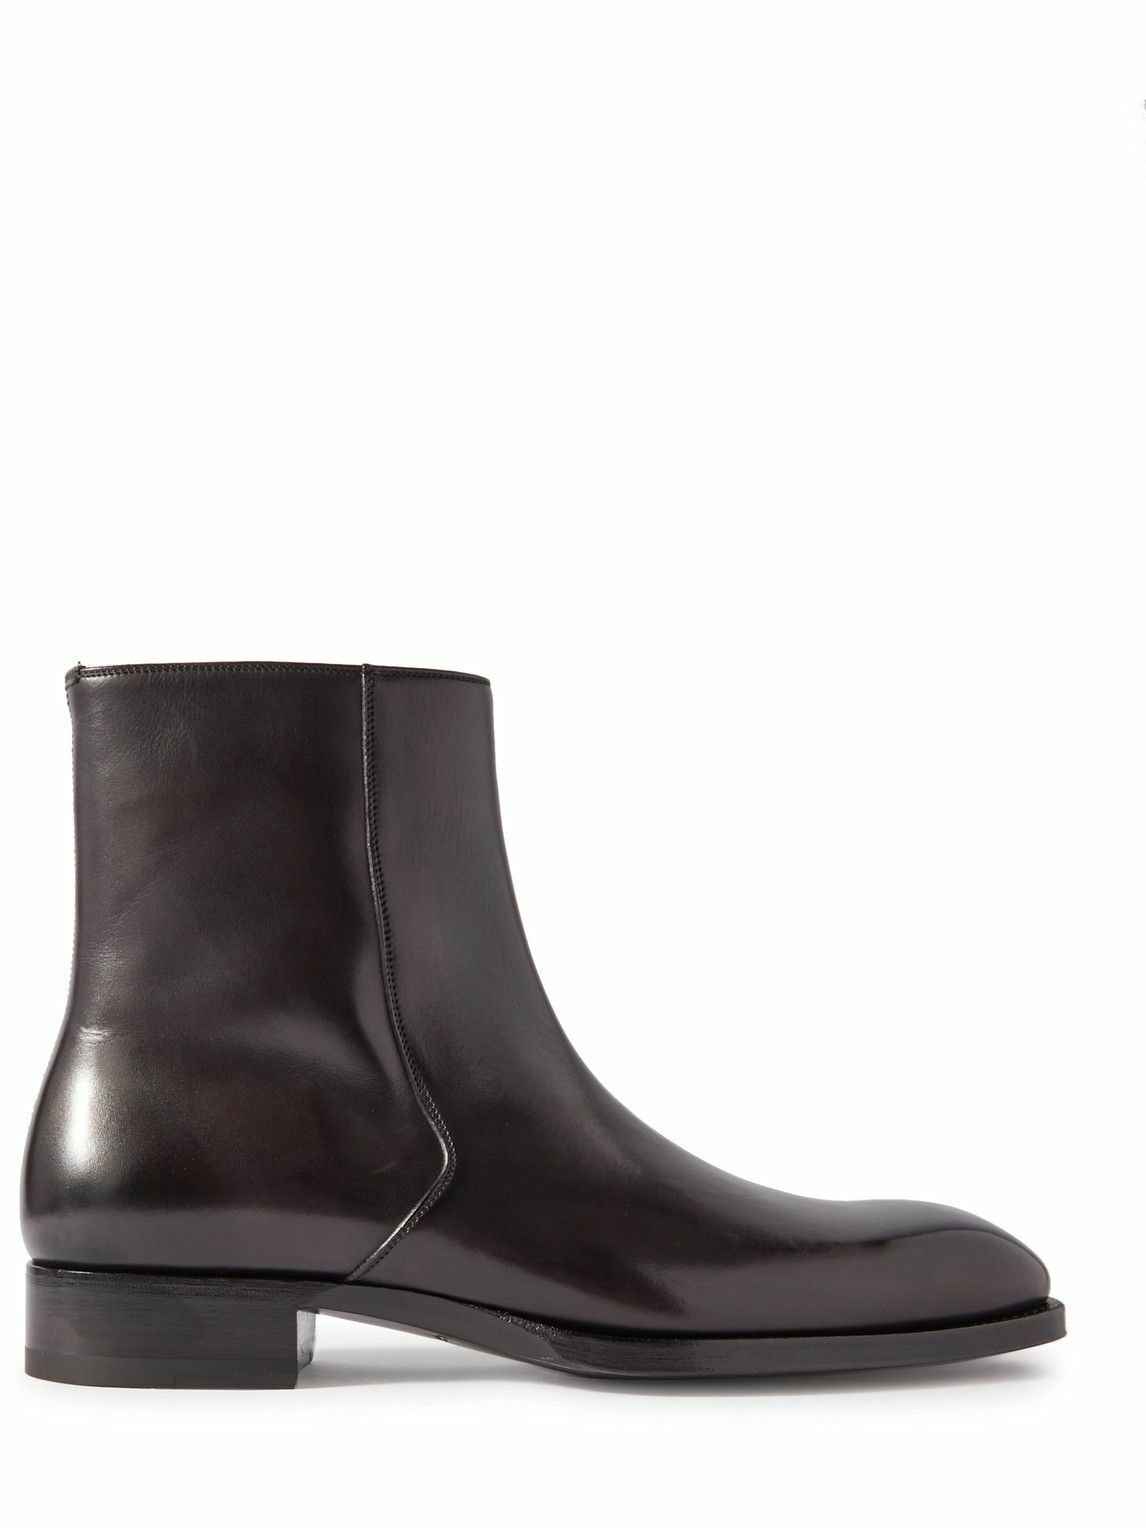 Photo: TOM FORD - Elkan Burnished-Leather Chelsea Boots - Brown